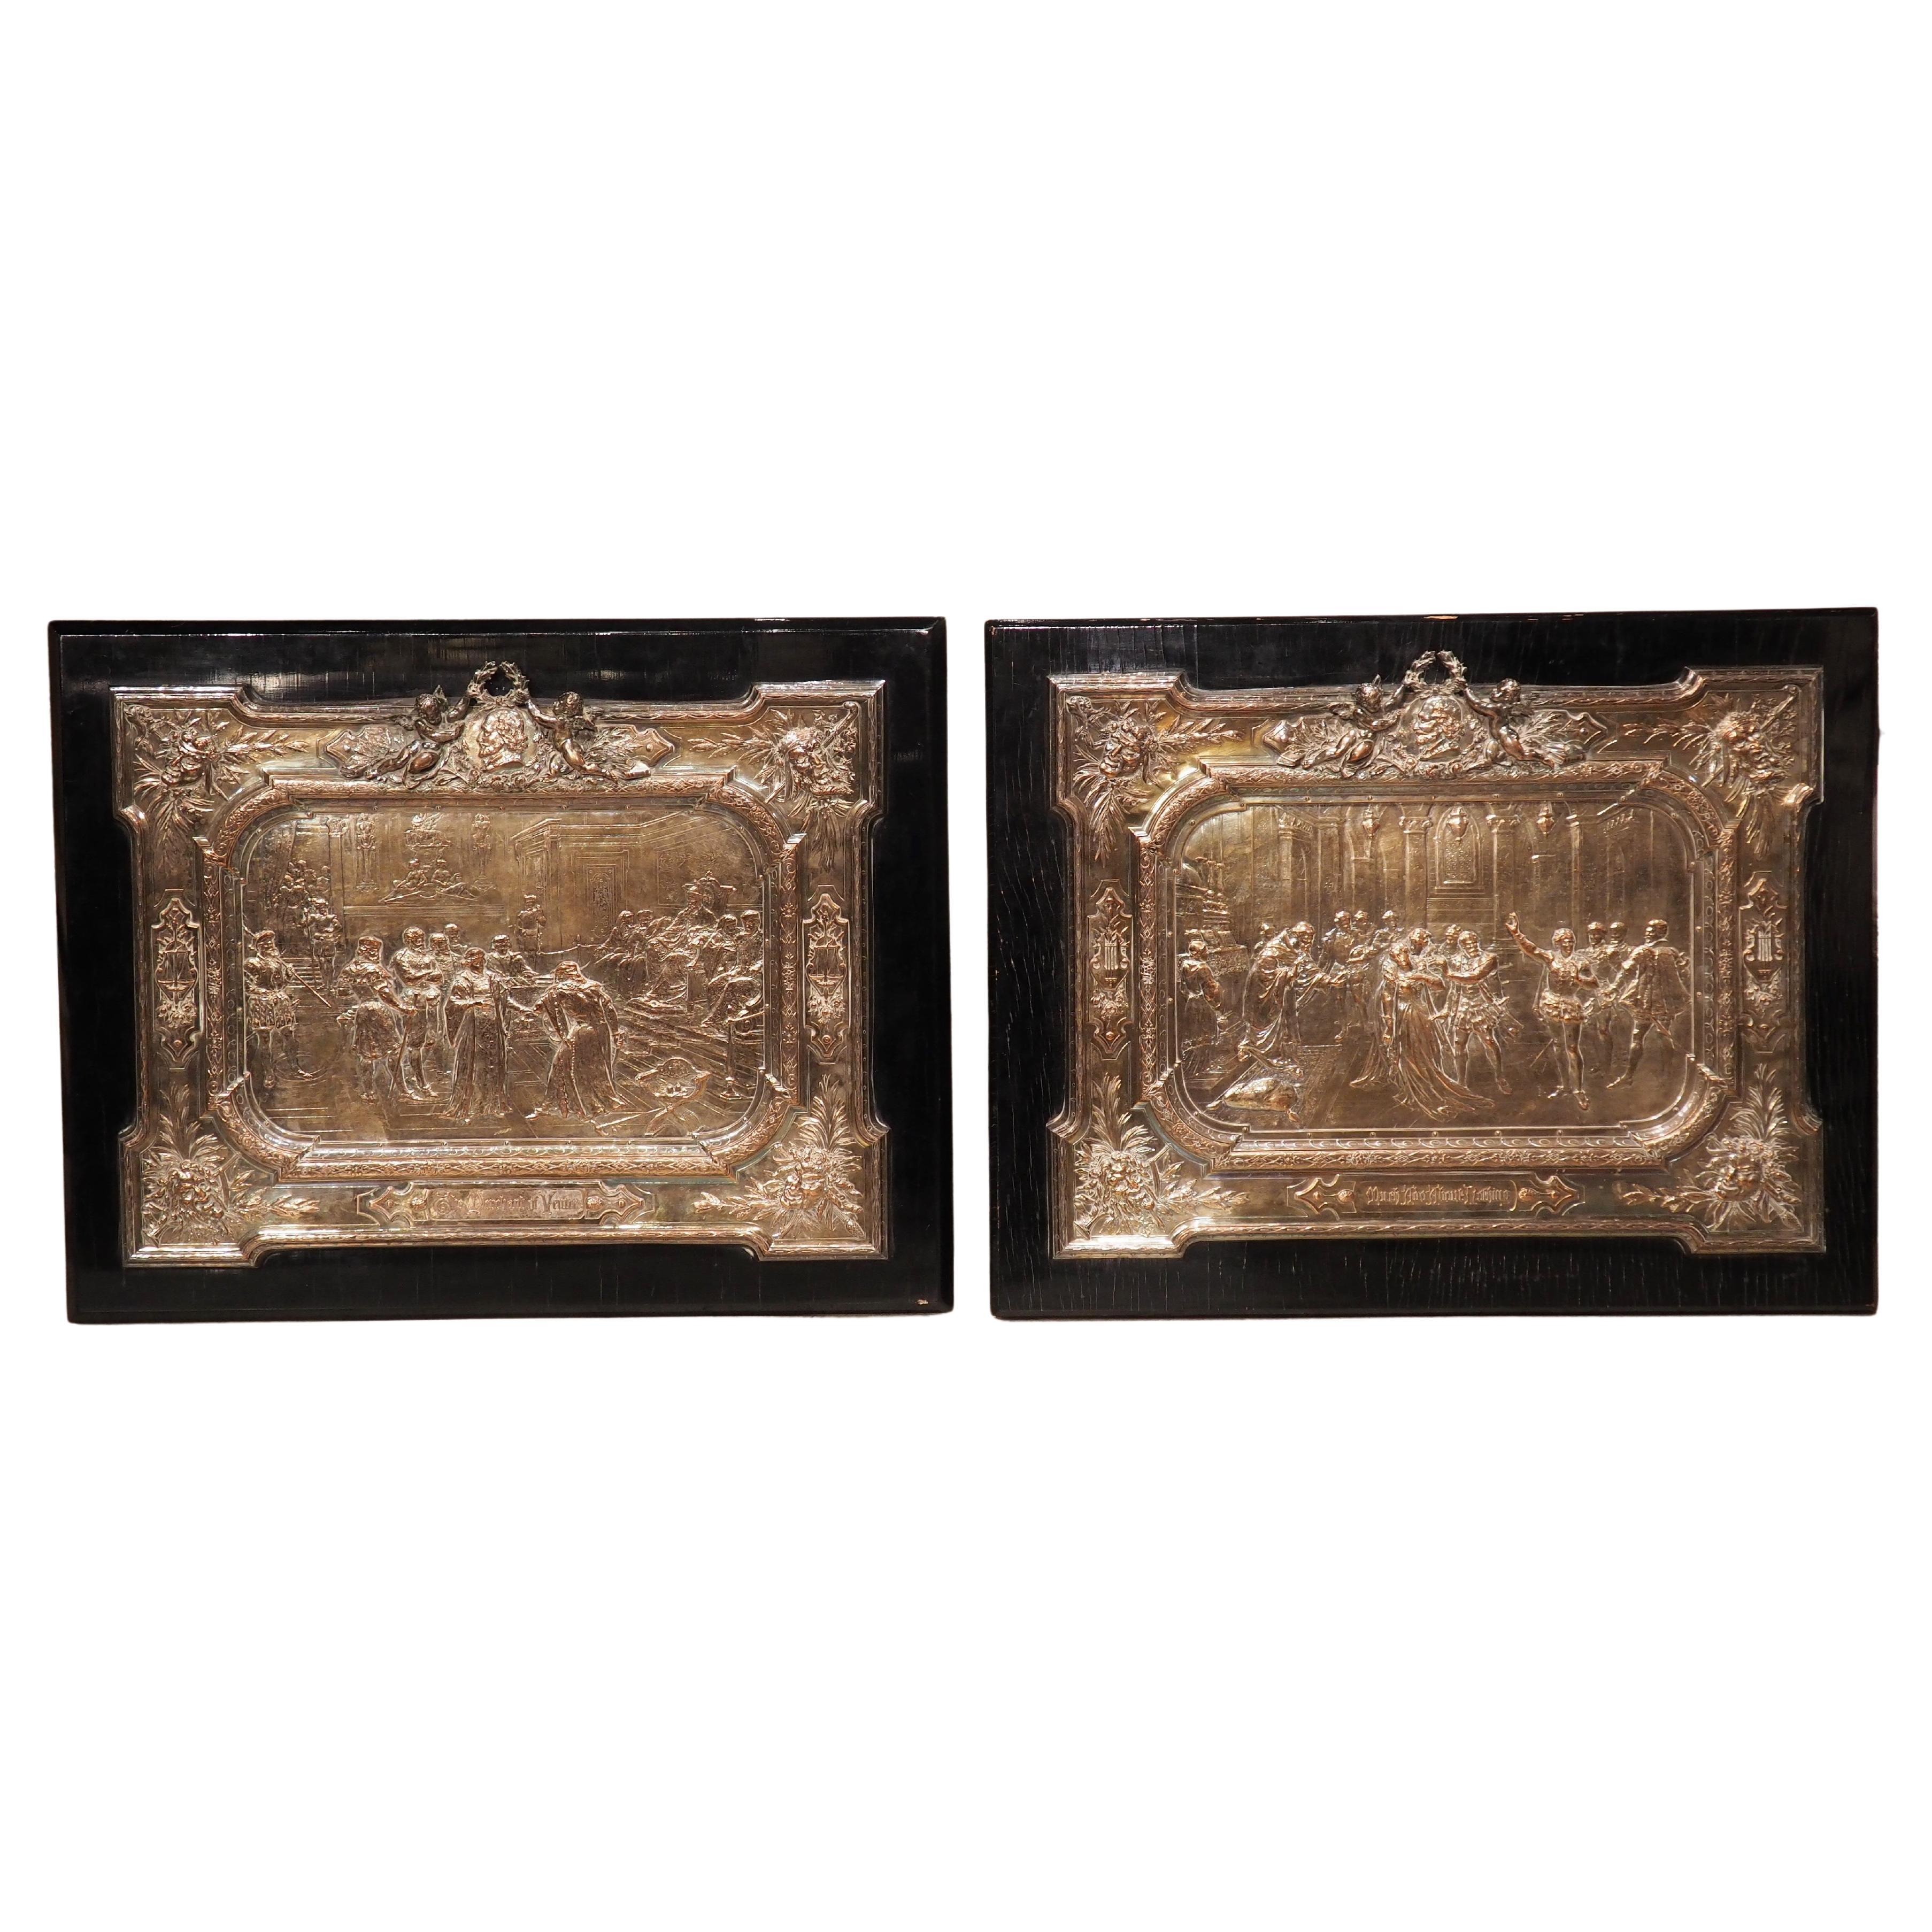 Pair of Late 19th Century Wood Mounted Copper Reliefs of Shakespeare Scenes